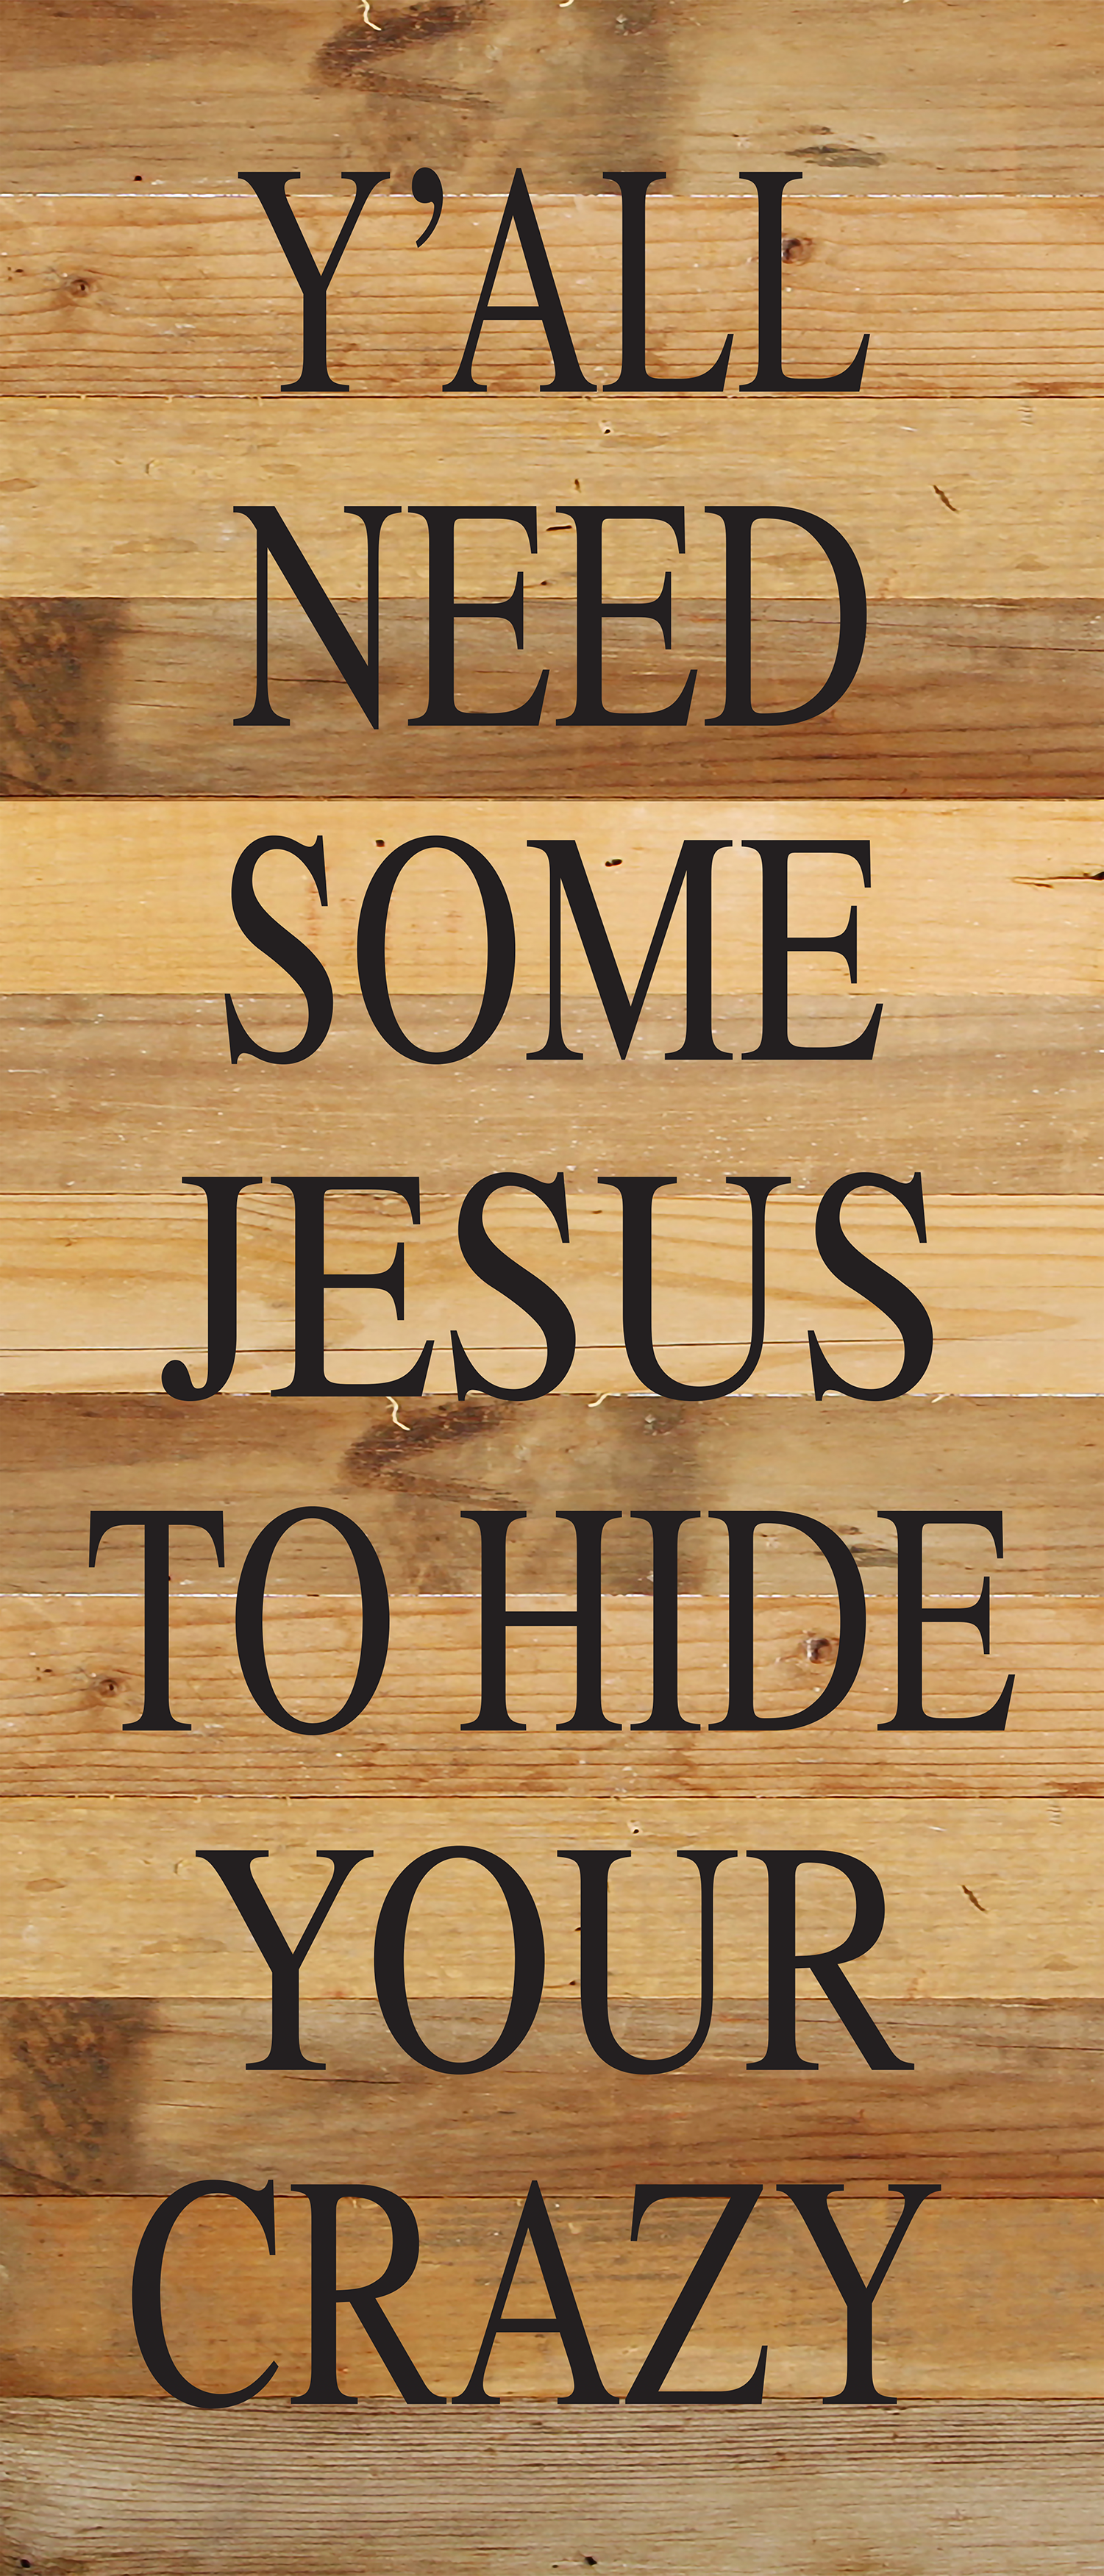 Y'all need some Jesus to hide your crazy. / 10"x10" Reclaimed Wood Sign